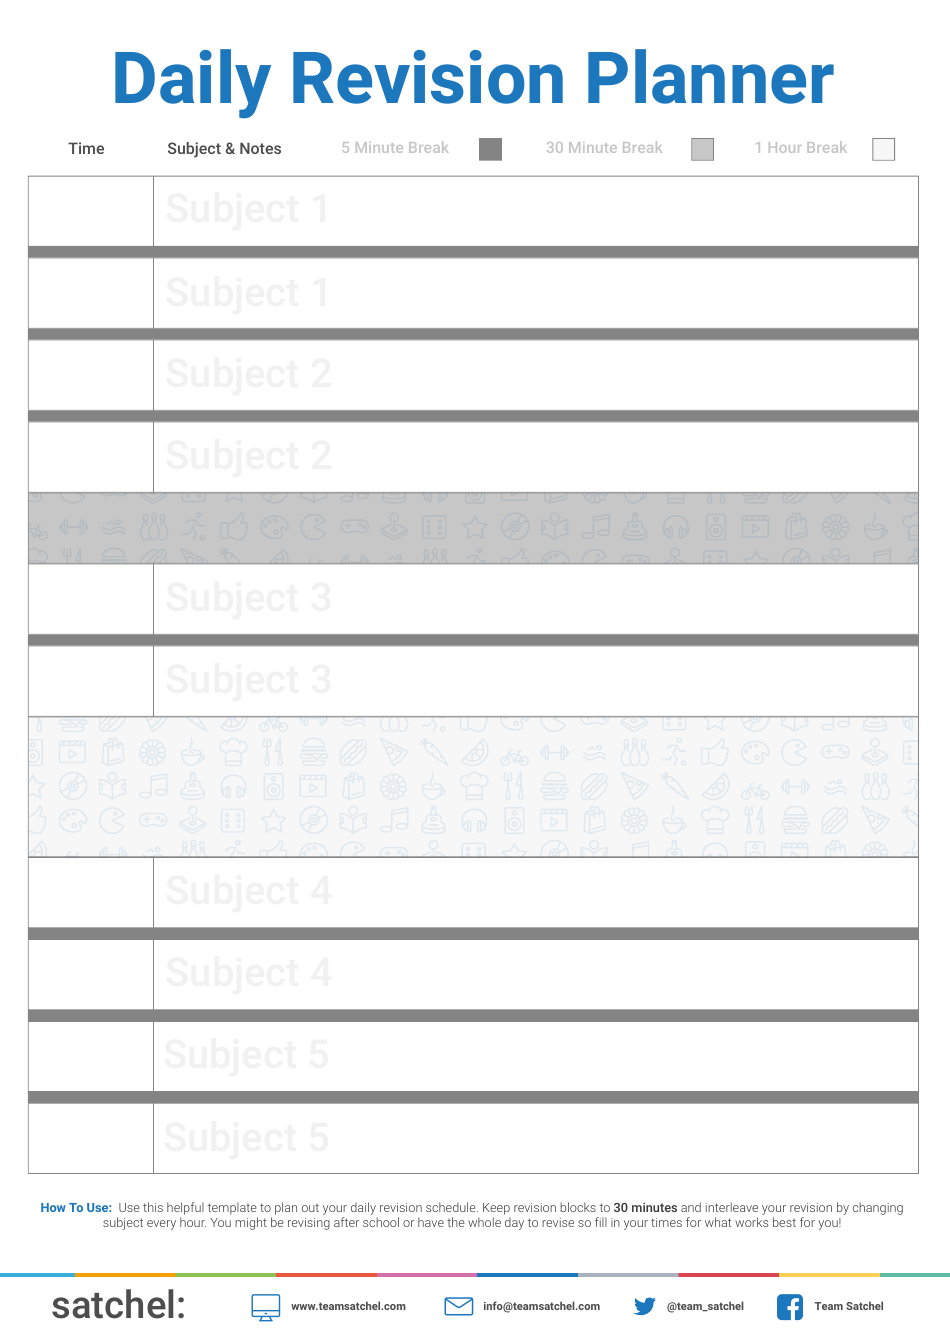 Daily Revision Planner Template Preview Image